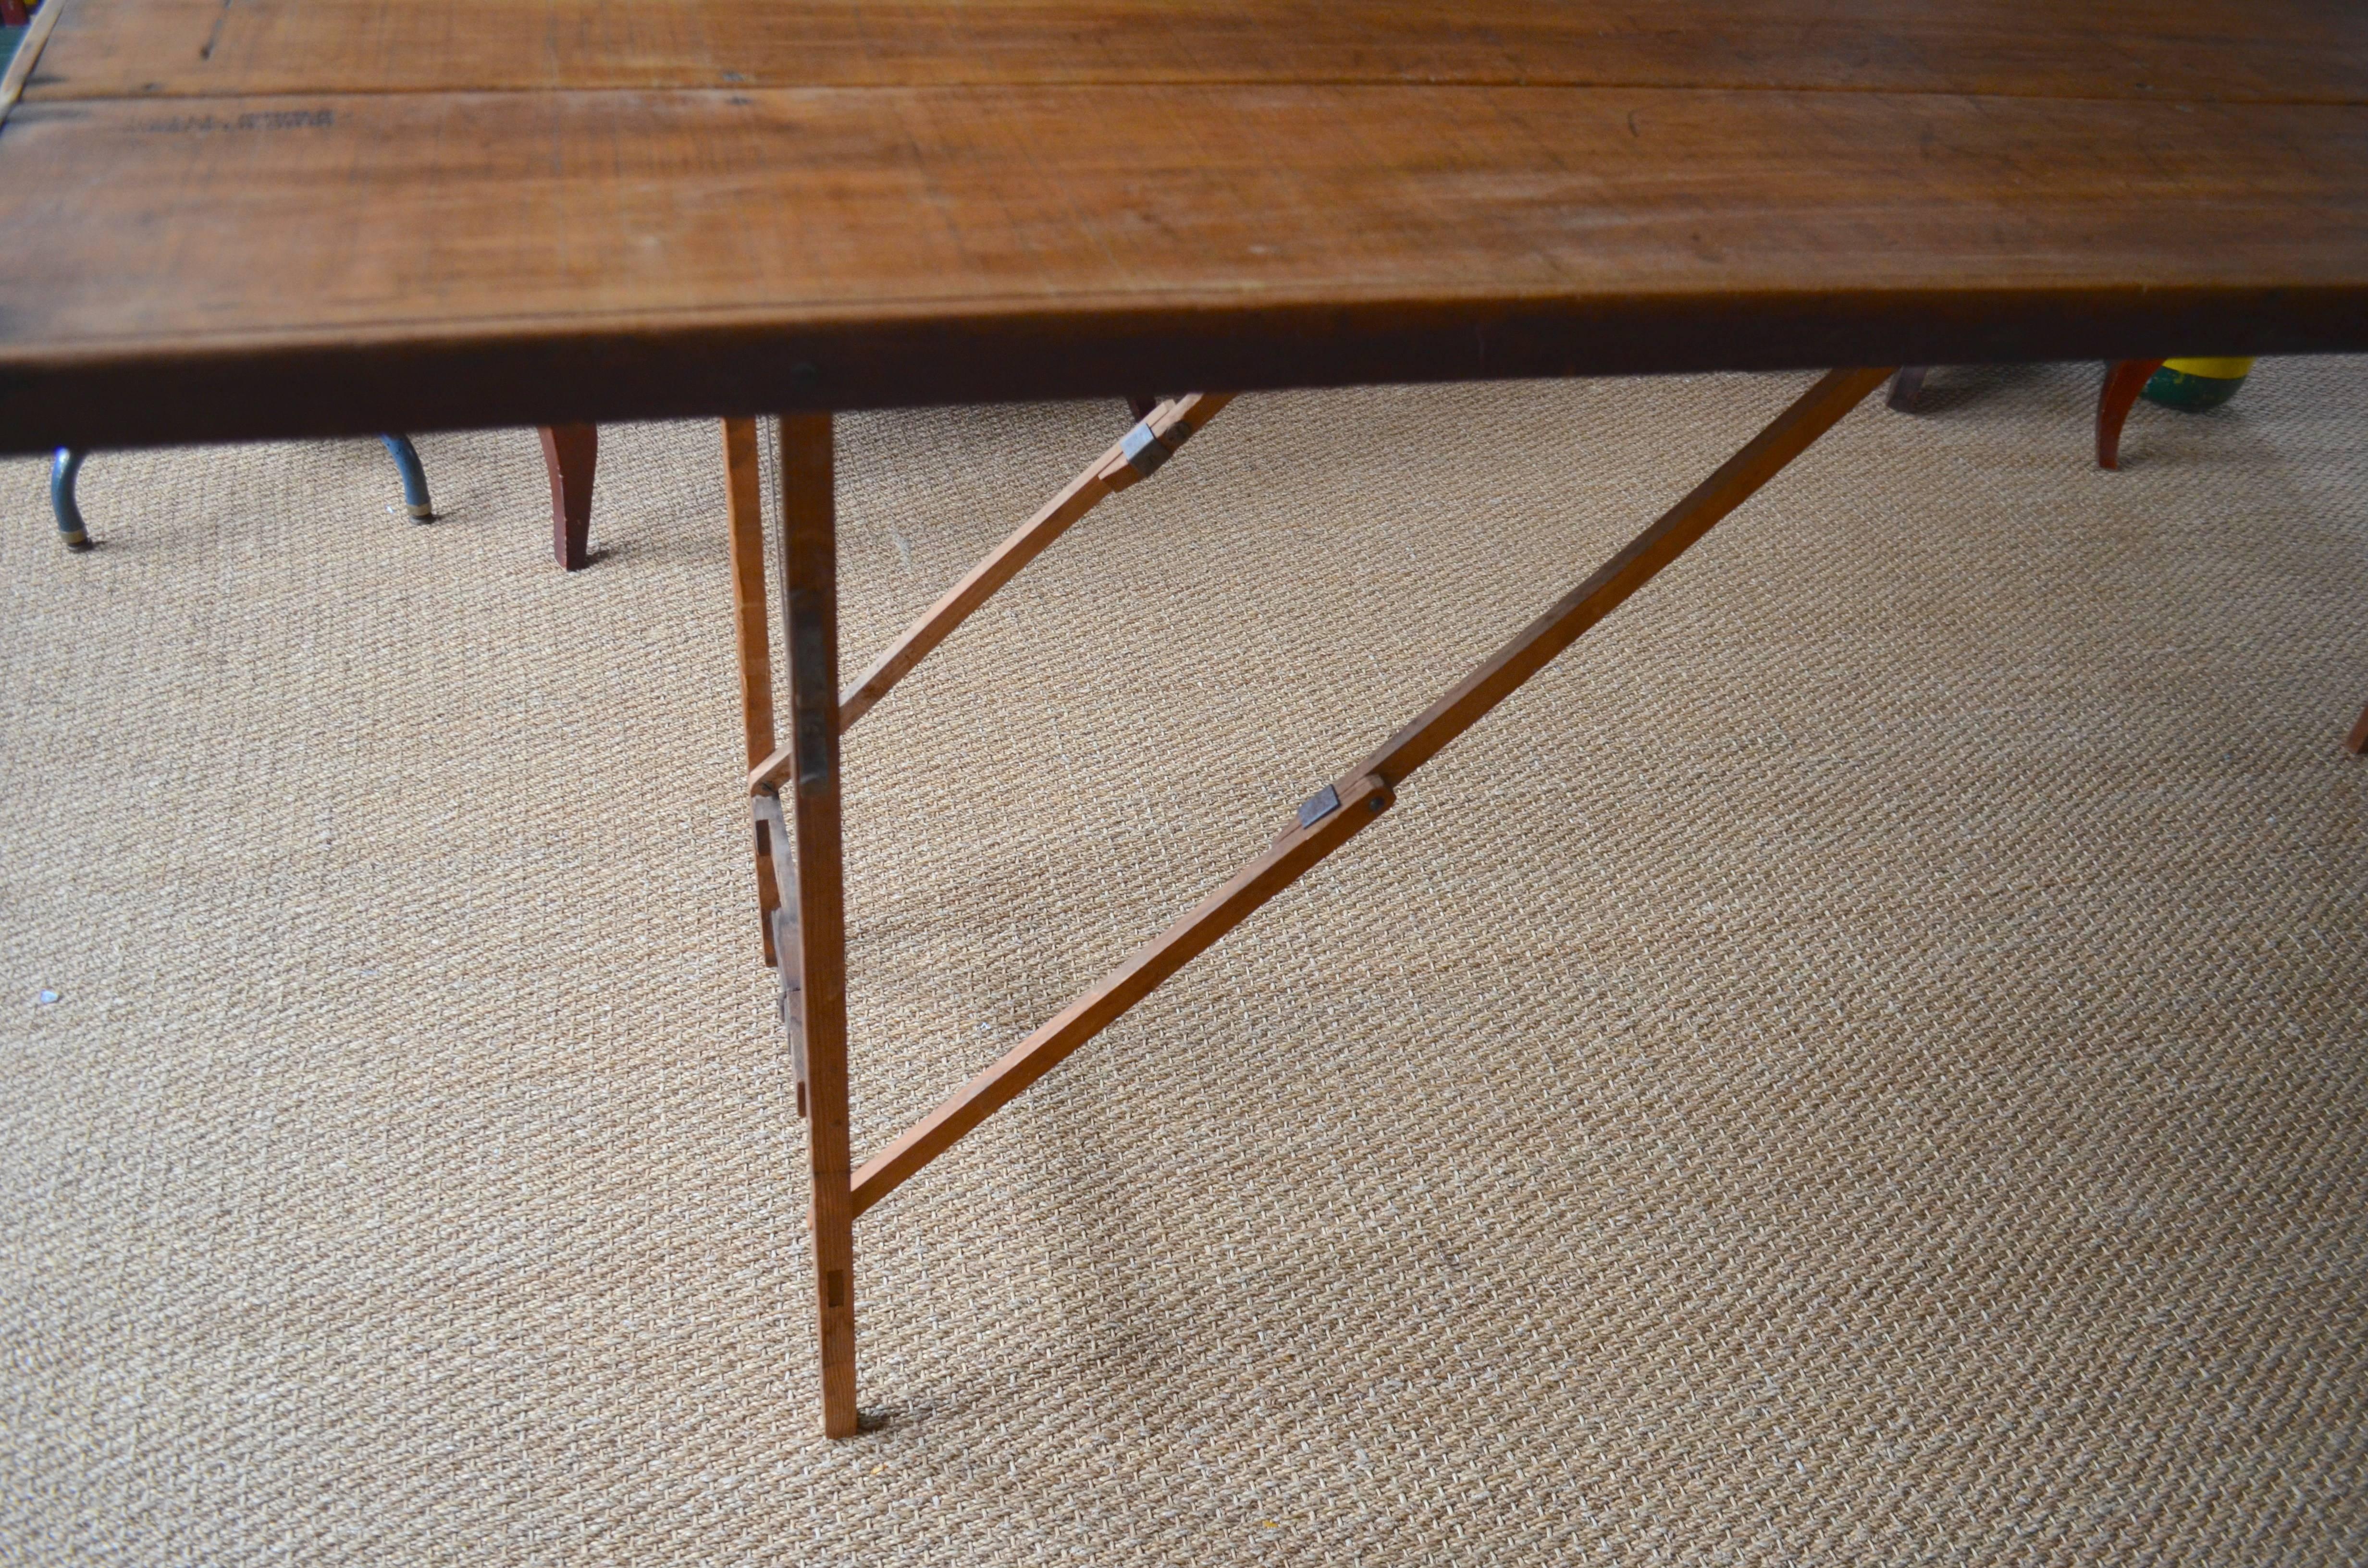 American Folding Wooden Table Used by Wallpaper